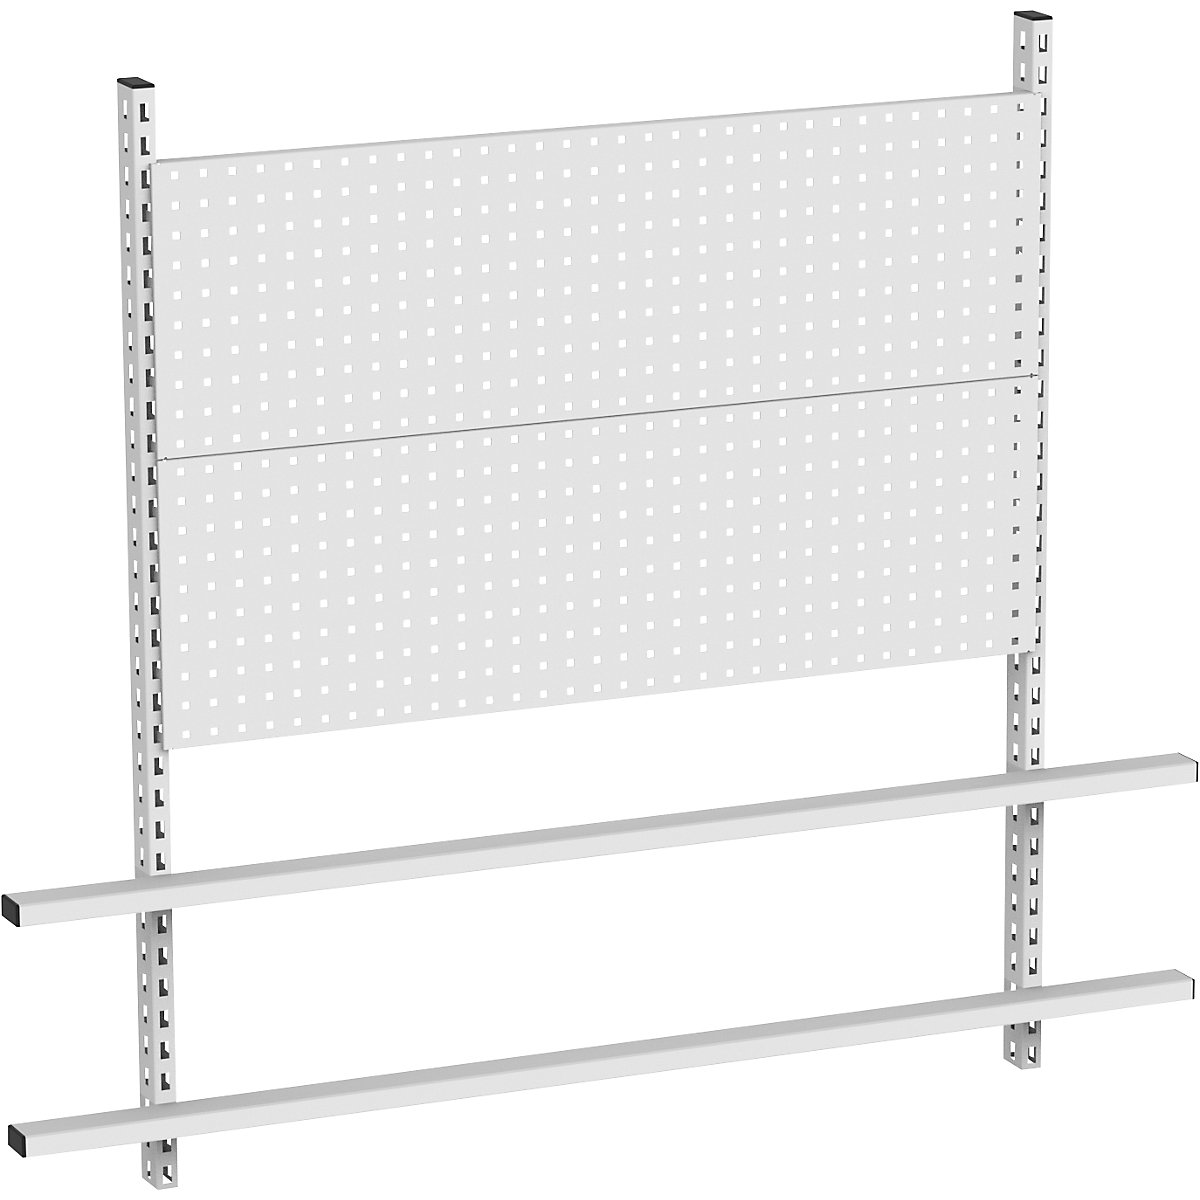 Add-on for table with perforated walls